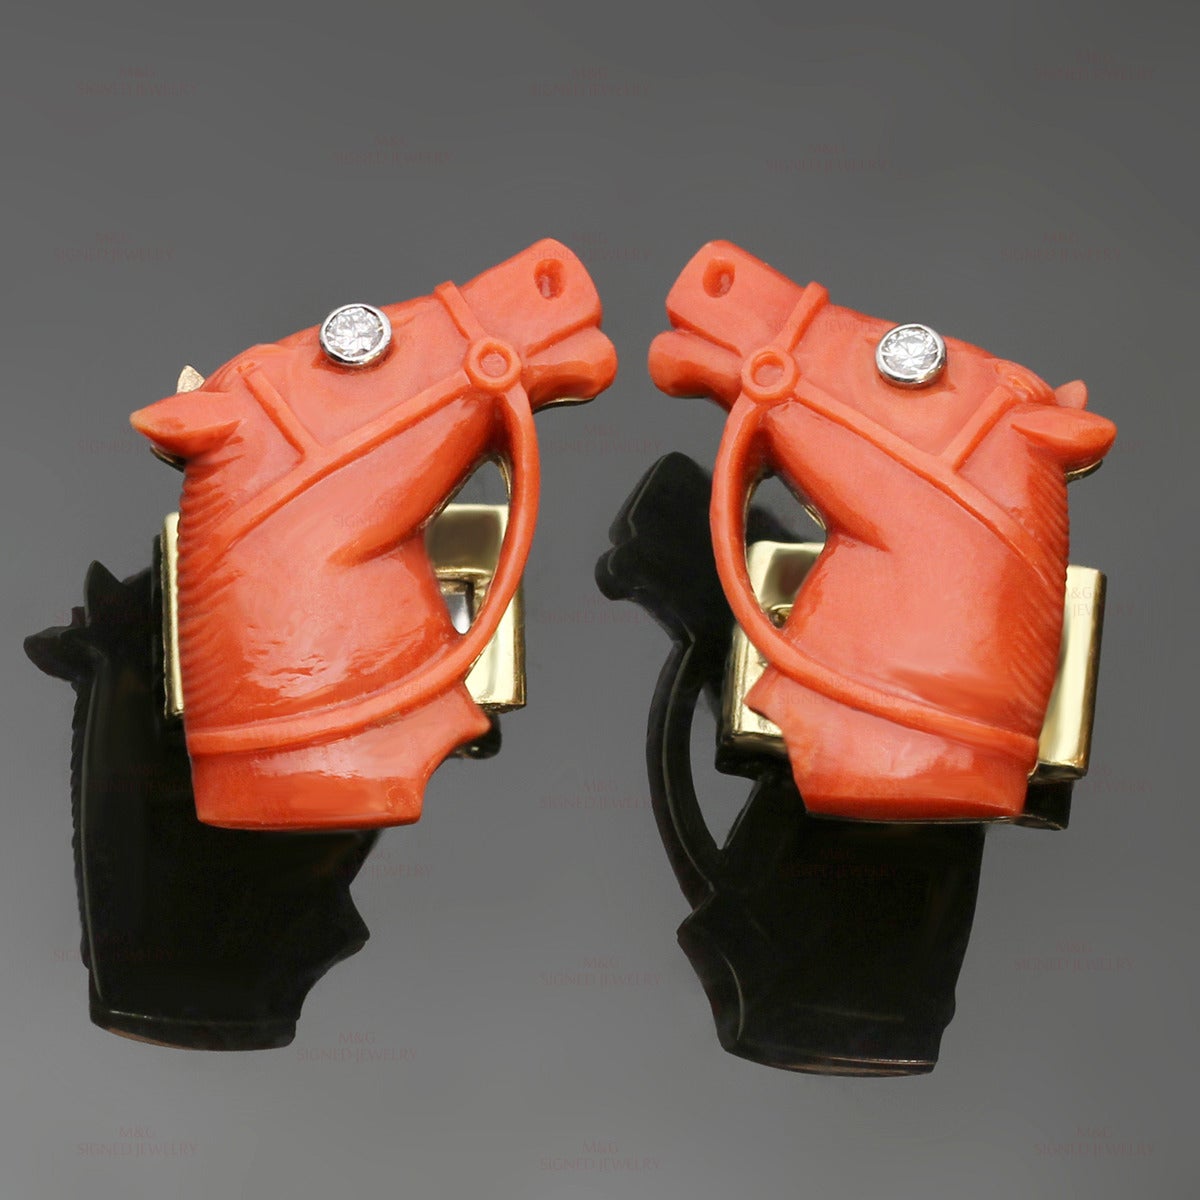 These unique cufflinks are made in 18k yellow gold and feature beautifully hand-carved red coral horse heads accented with diamond eyes bezel-set in white gold. United States circa 1960s. Measurements: 0.70